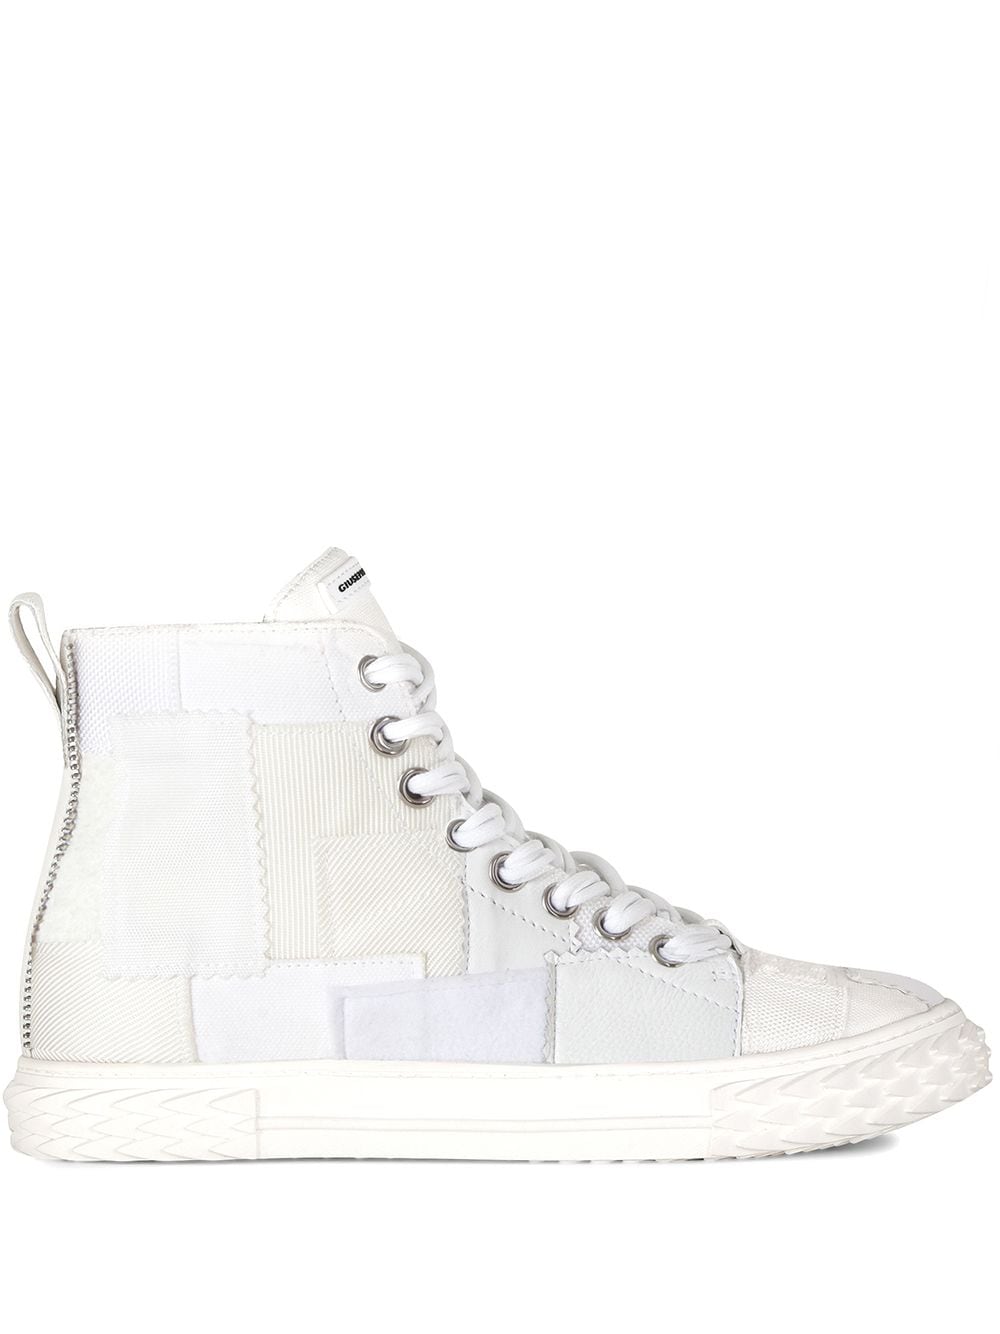 patchwork high-top sneakers